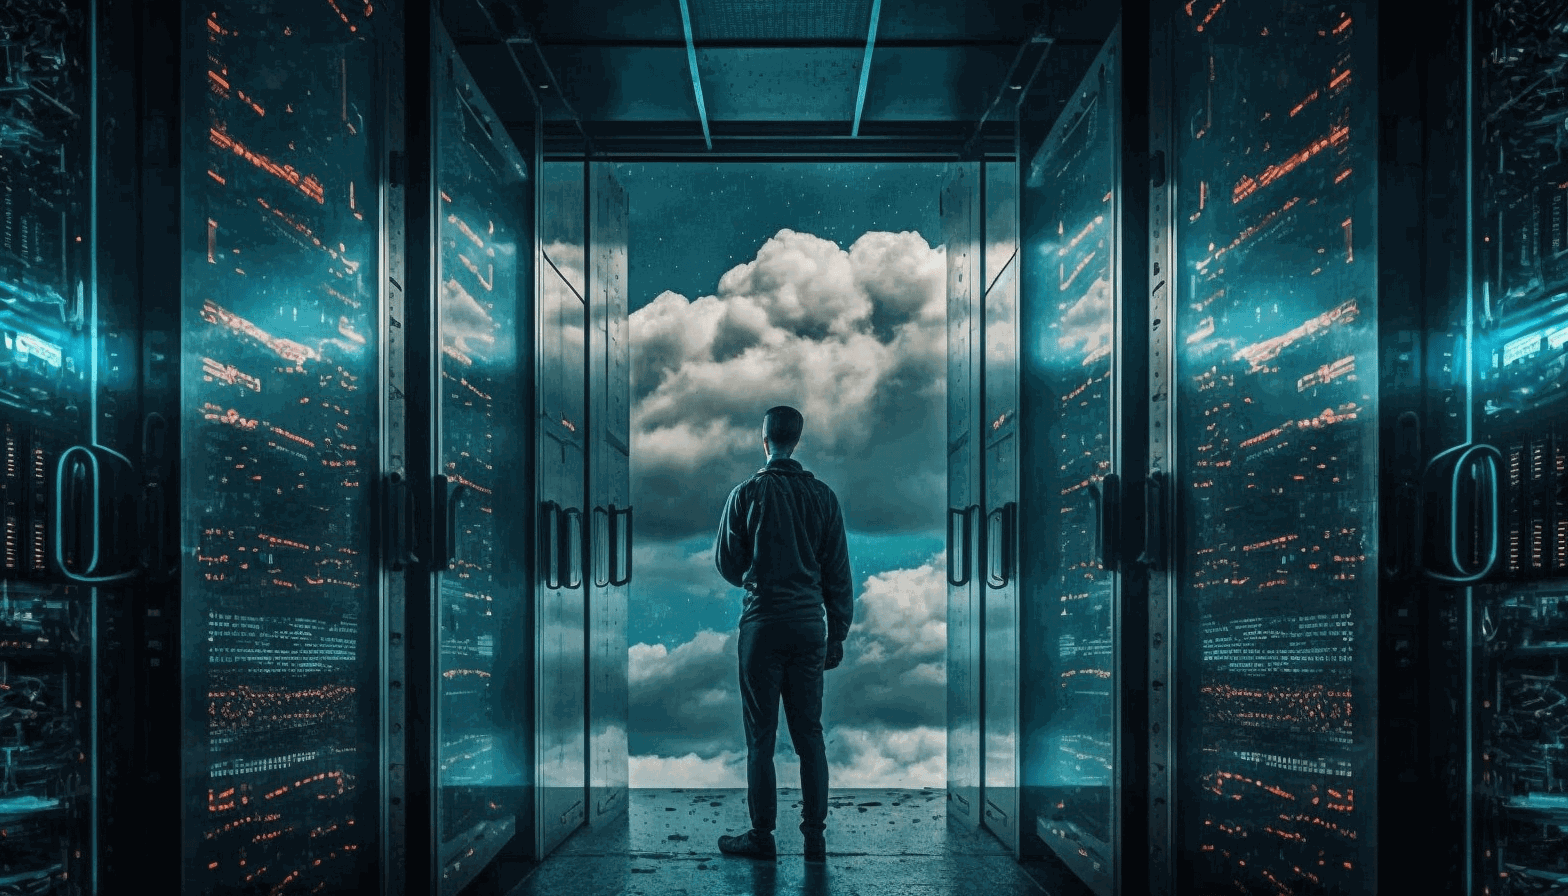 An image of a server room with racks of servers on one side and a cloud on the other side, with a person standing in the middle looking at them both.